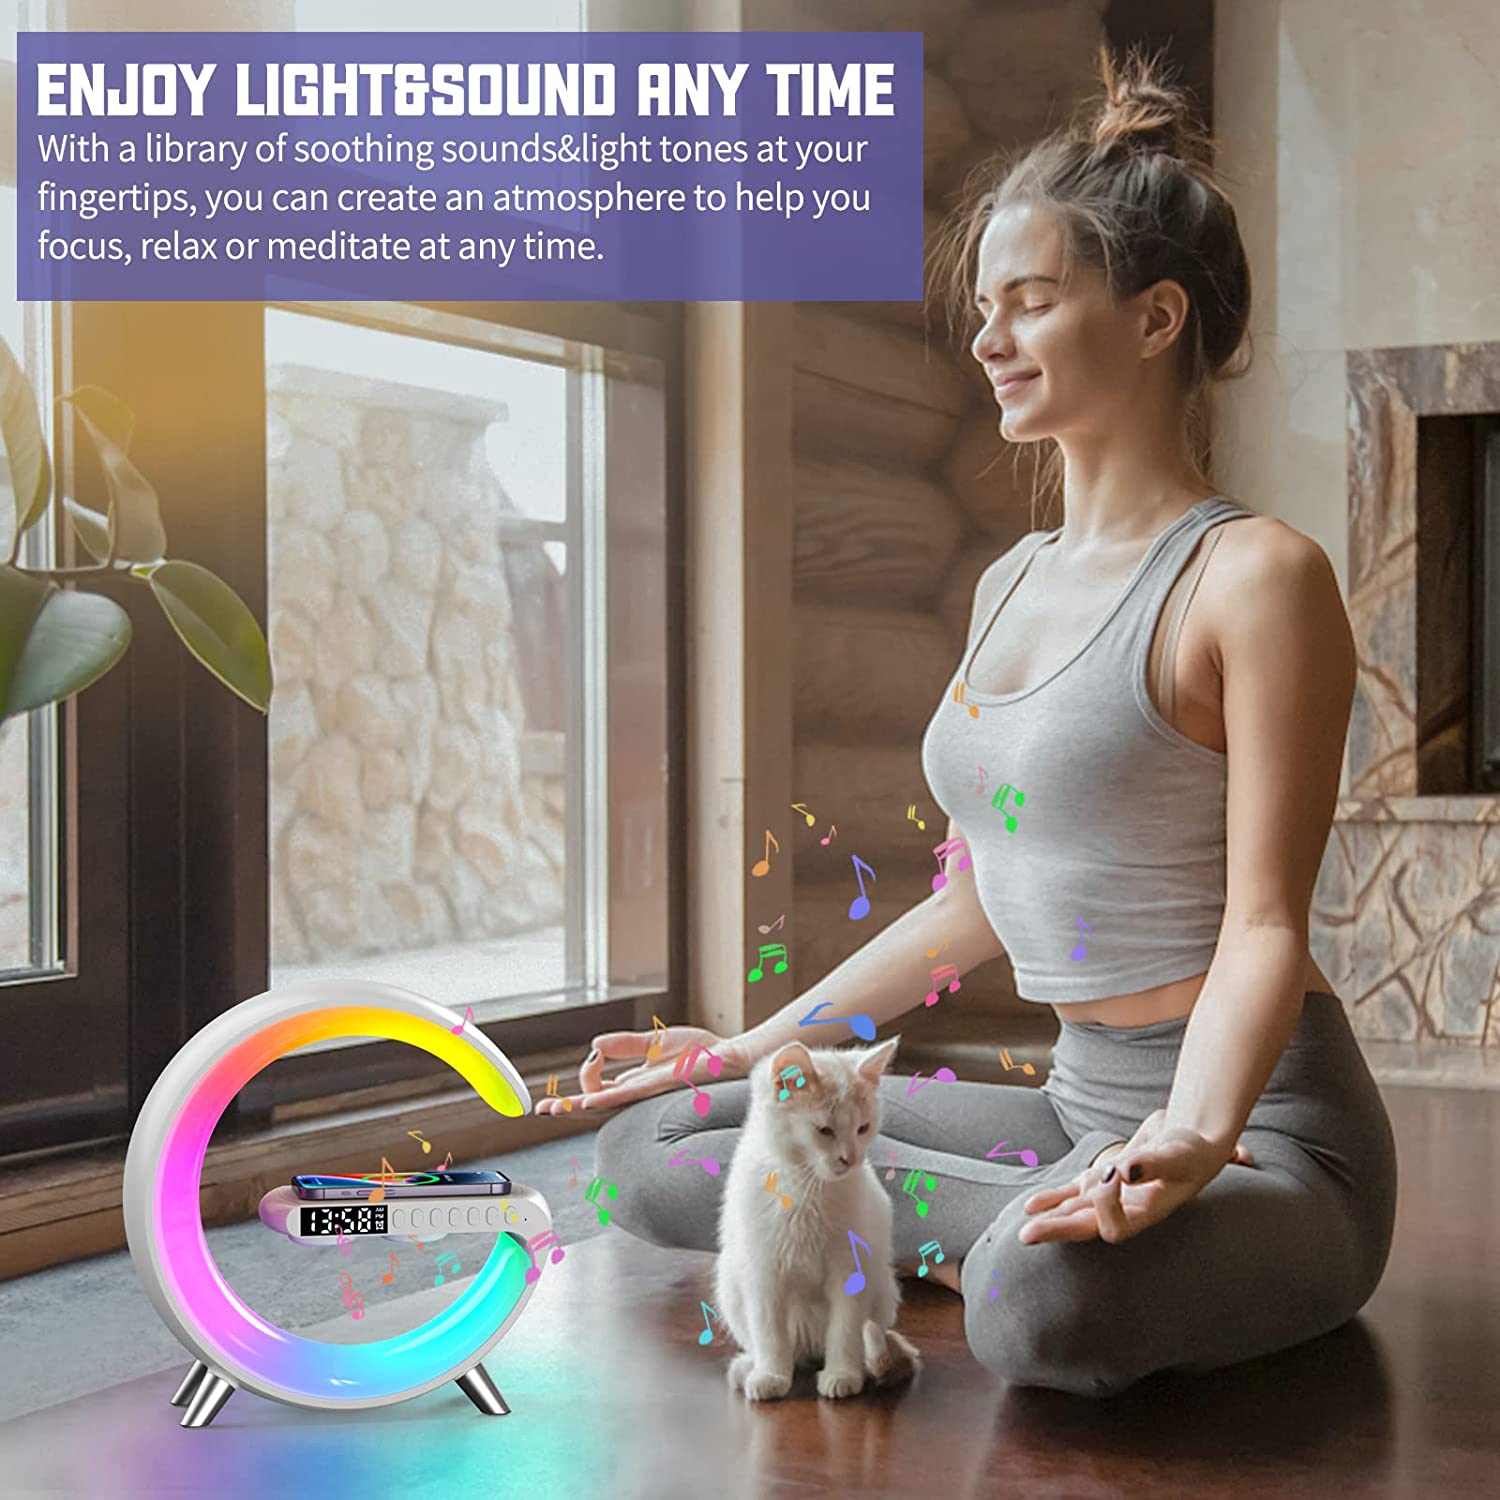 Smart Light Multifunctional 15W Wireless Charger Built-in Bluetooth Speaker - White